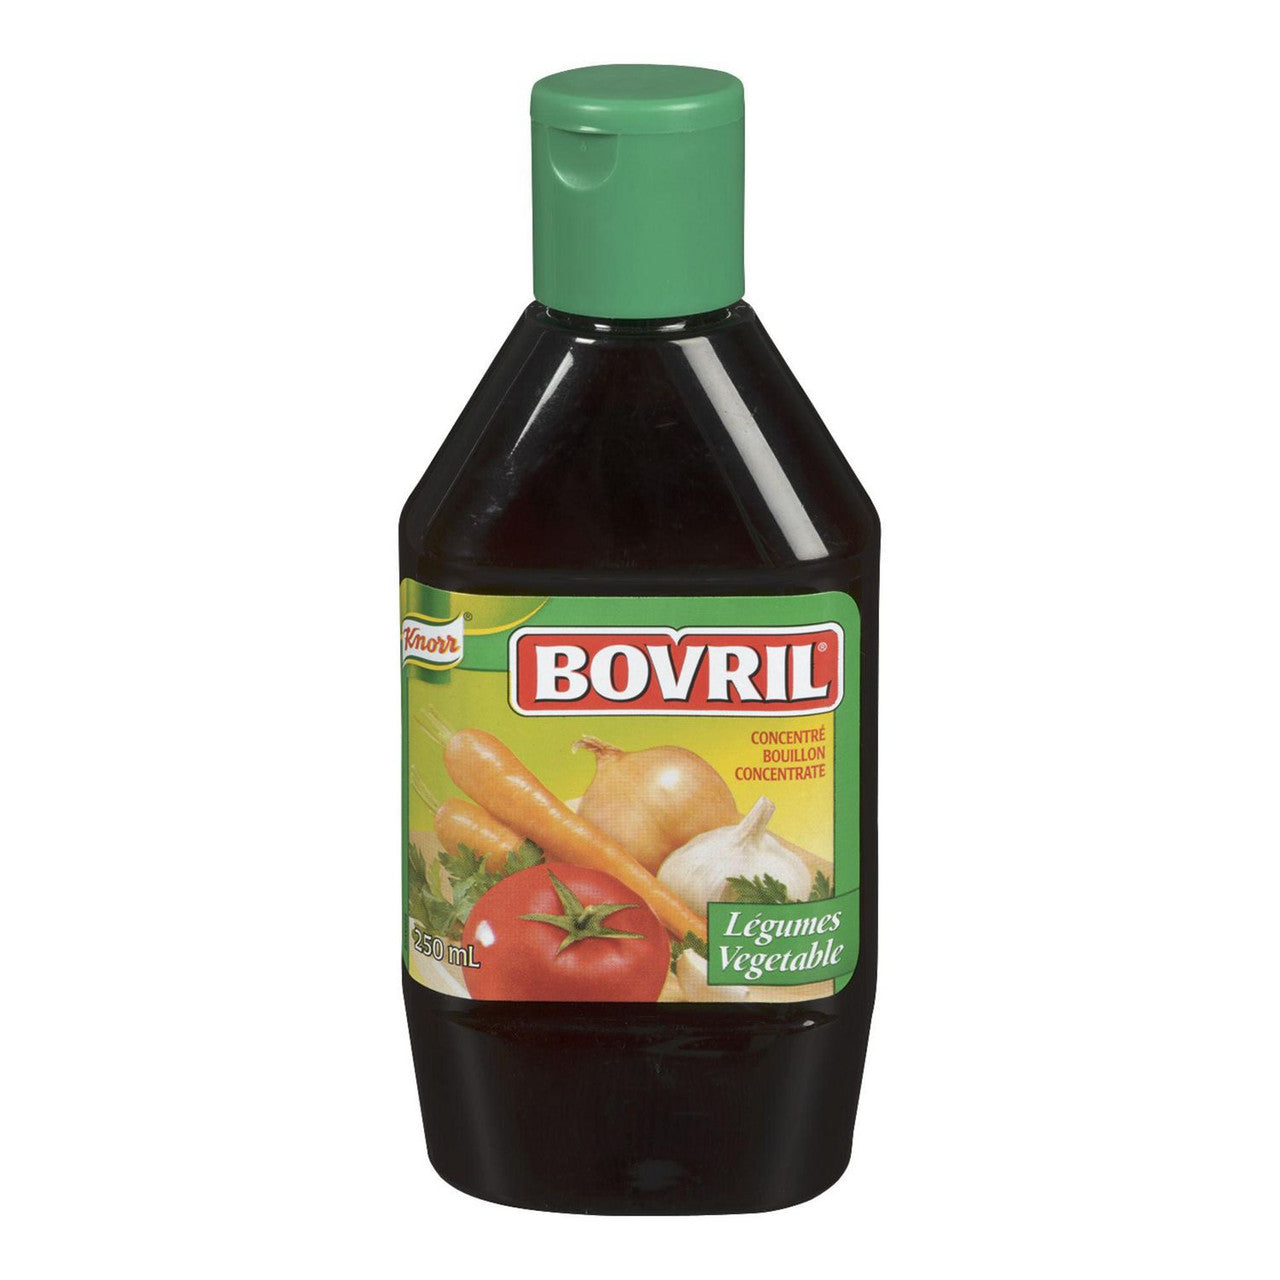 Knorr Bovril Vegetable Concentrated Liquid Stock, 250mL/8.45 fl.oz, (Imported from Canada)